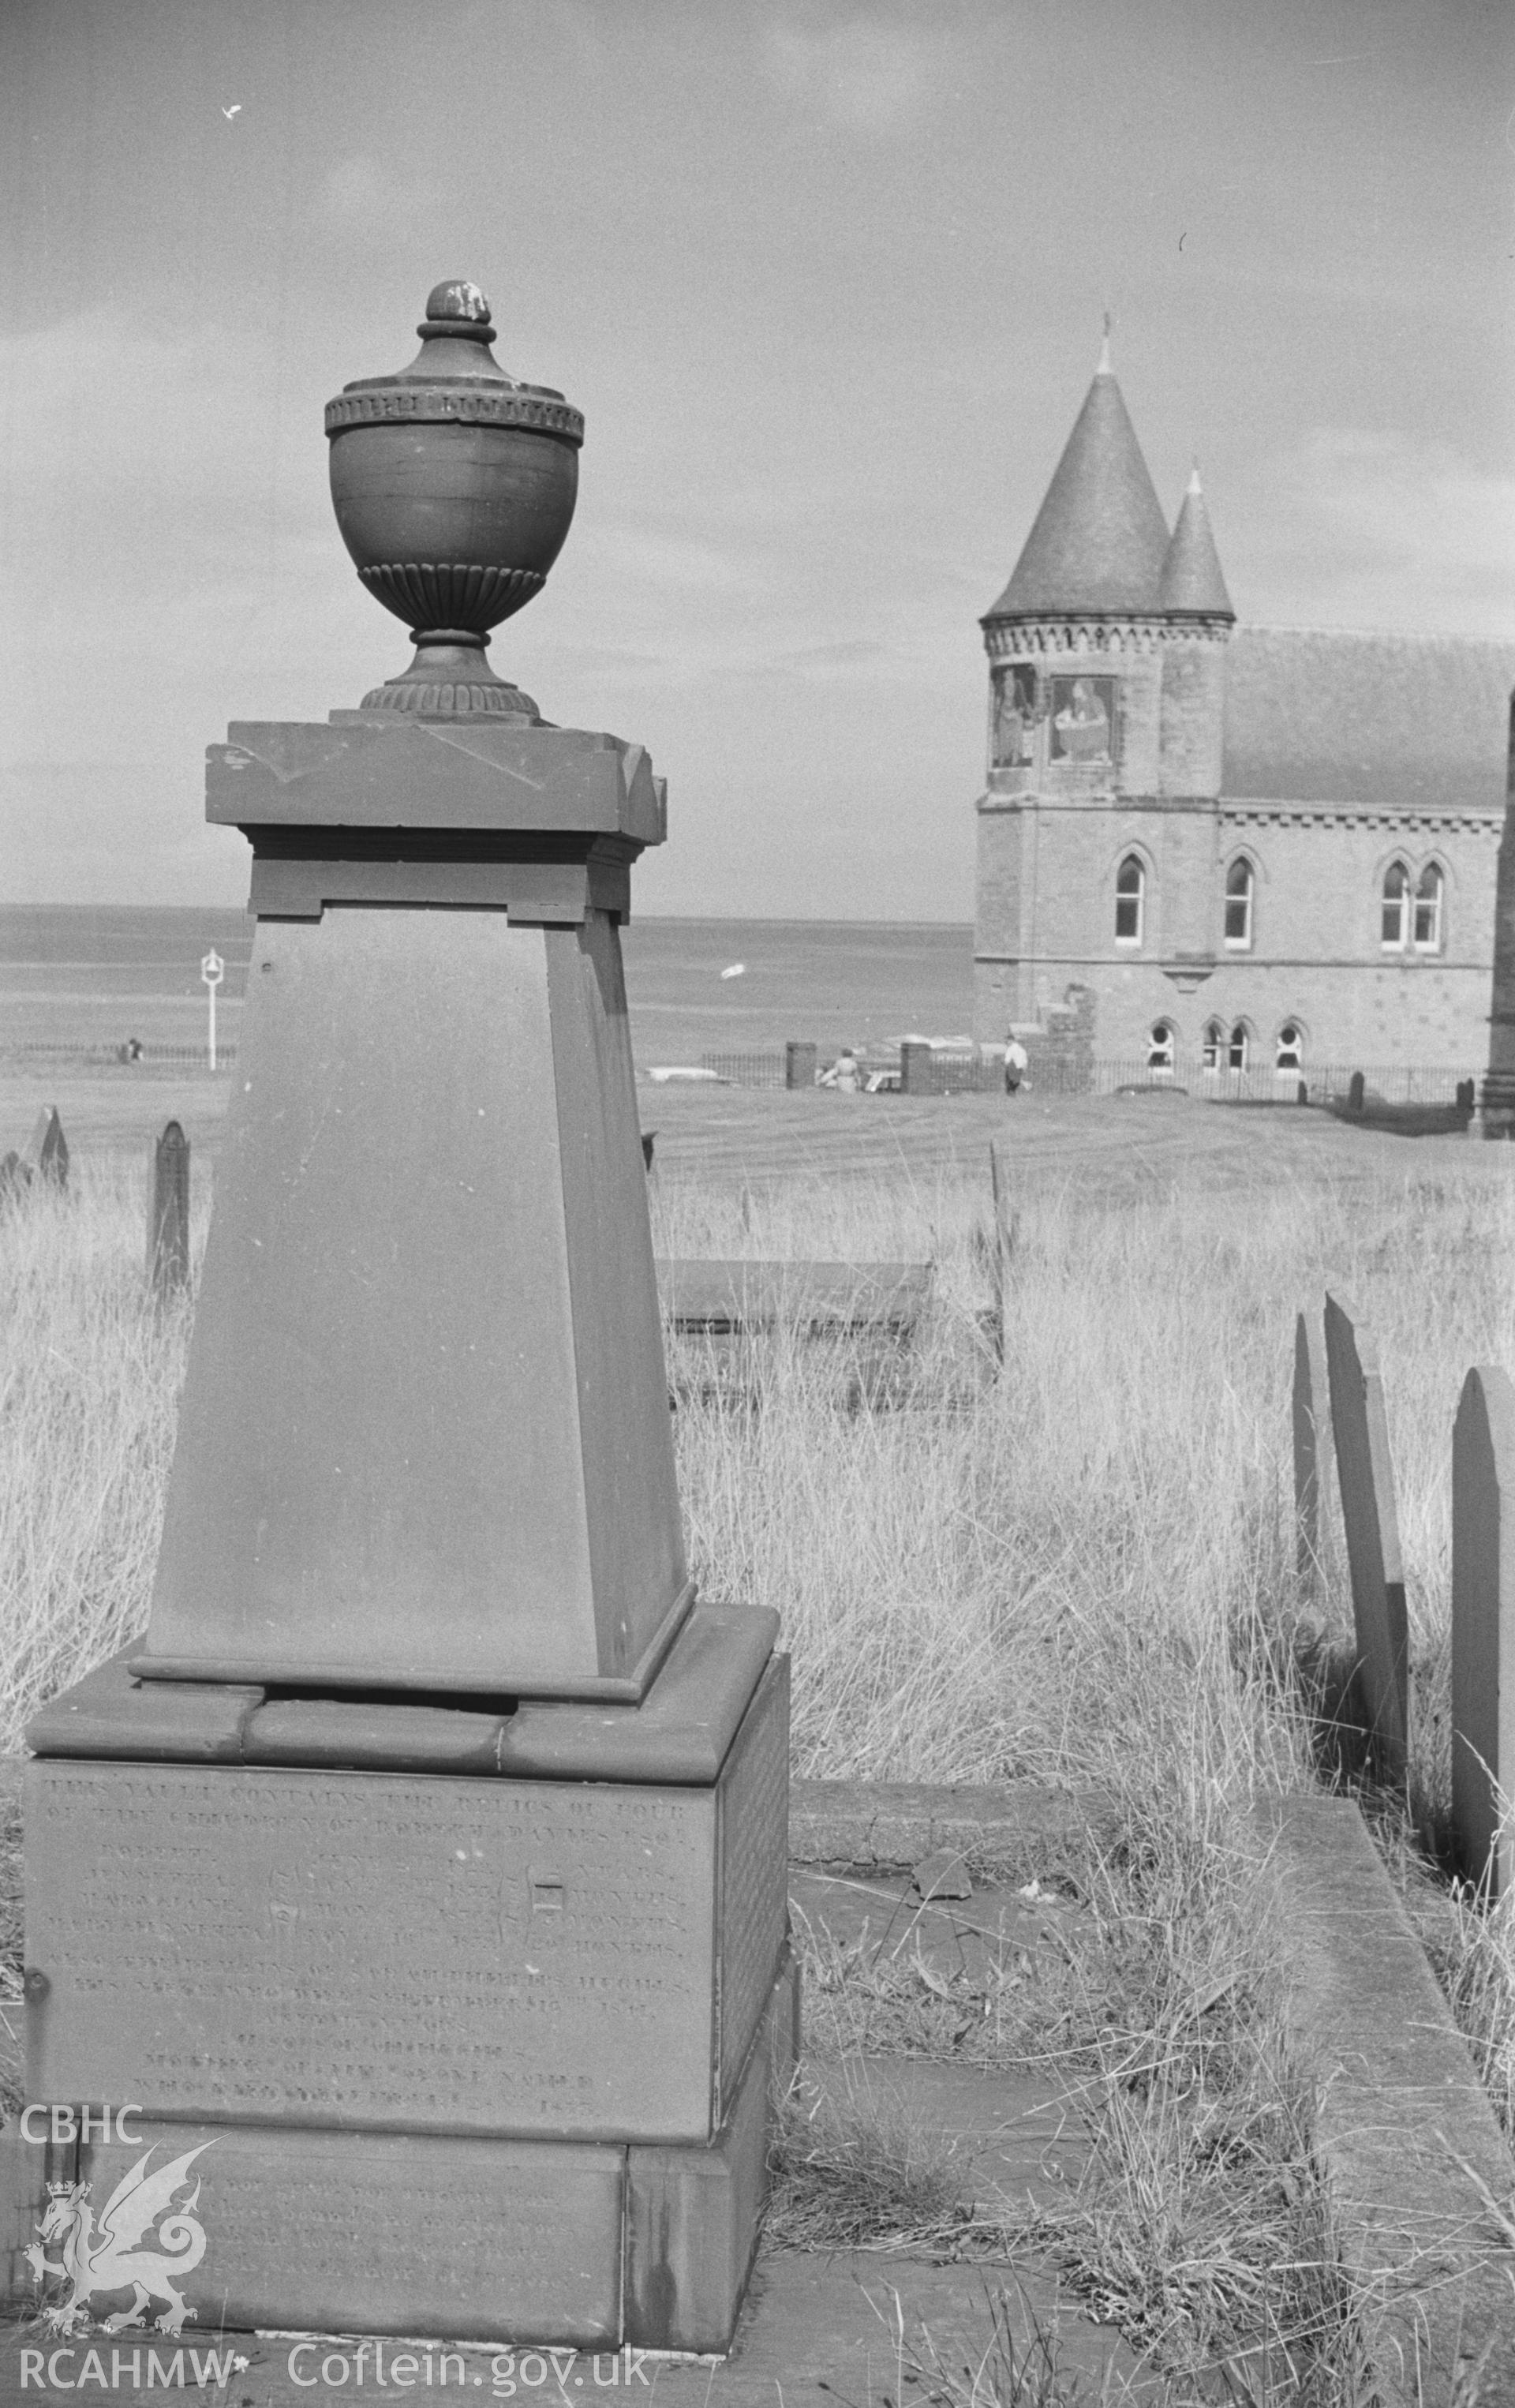 Digital copy of a black and white negative showing grave in St. Michael's church graveyard with the Old College in the background, Aberystwyth. Photographed by Arthur O. Chater in August 1966.